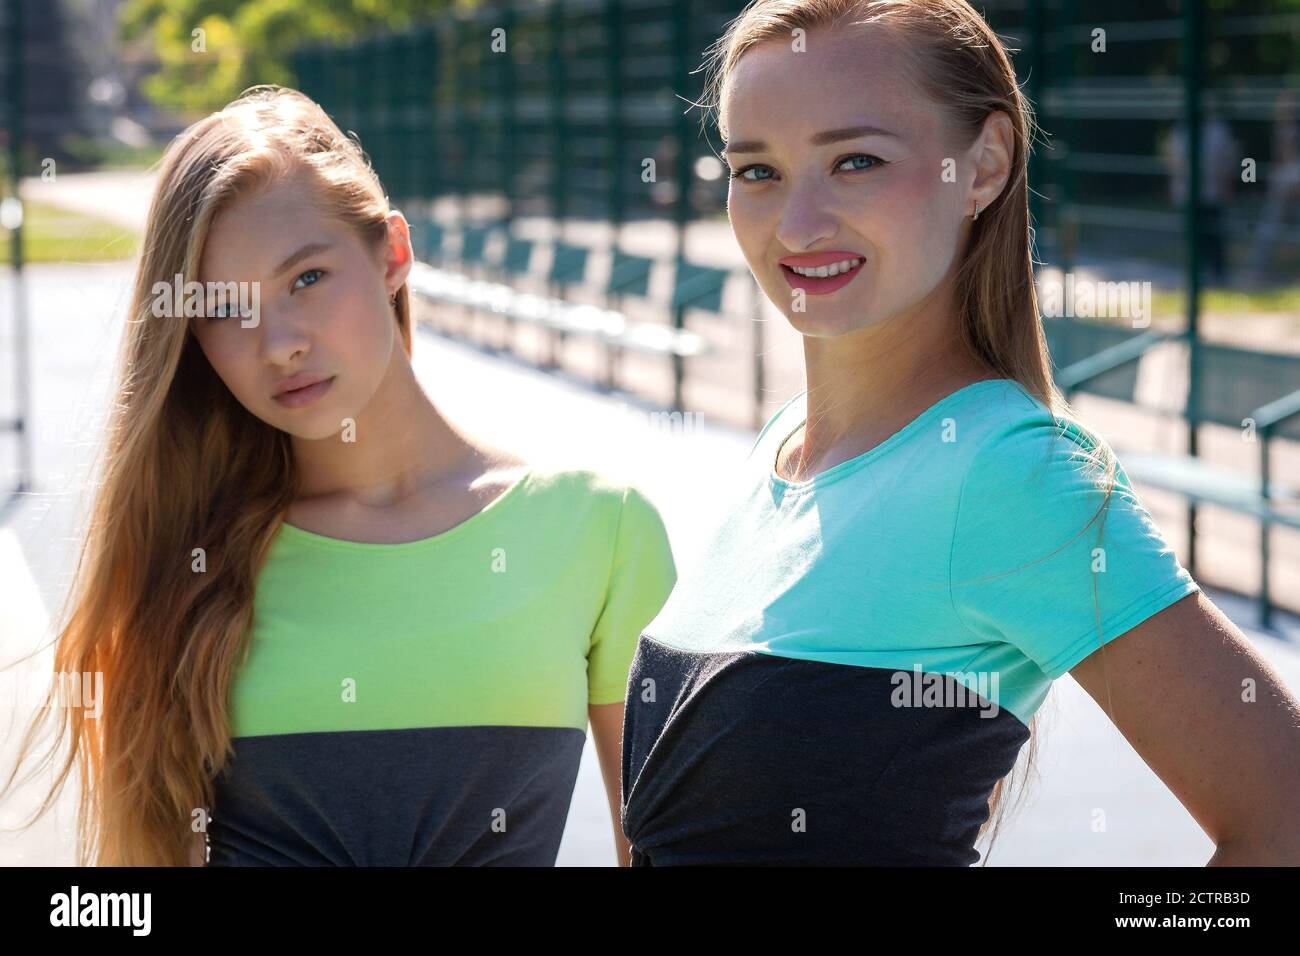 Sportive woman and girl models in sportswear on the sports ground at sunny day. Portrait Stock Photo